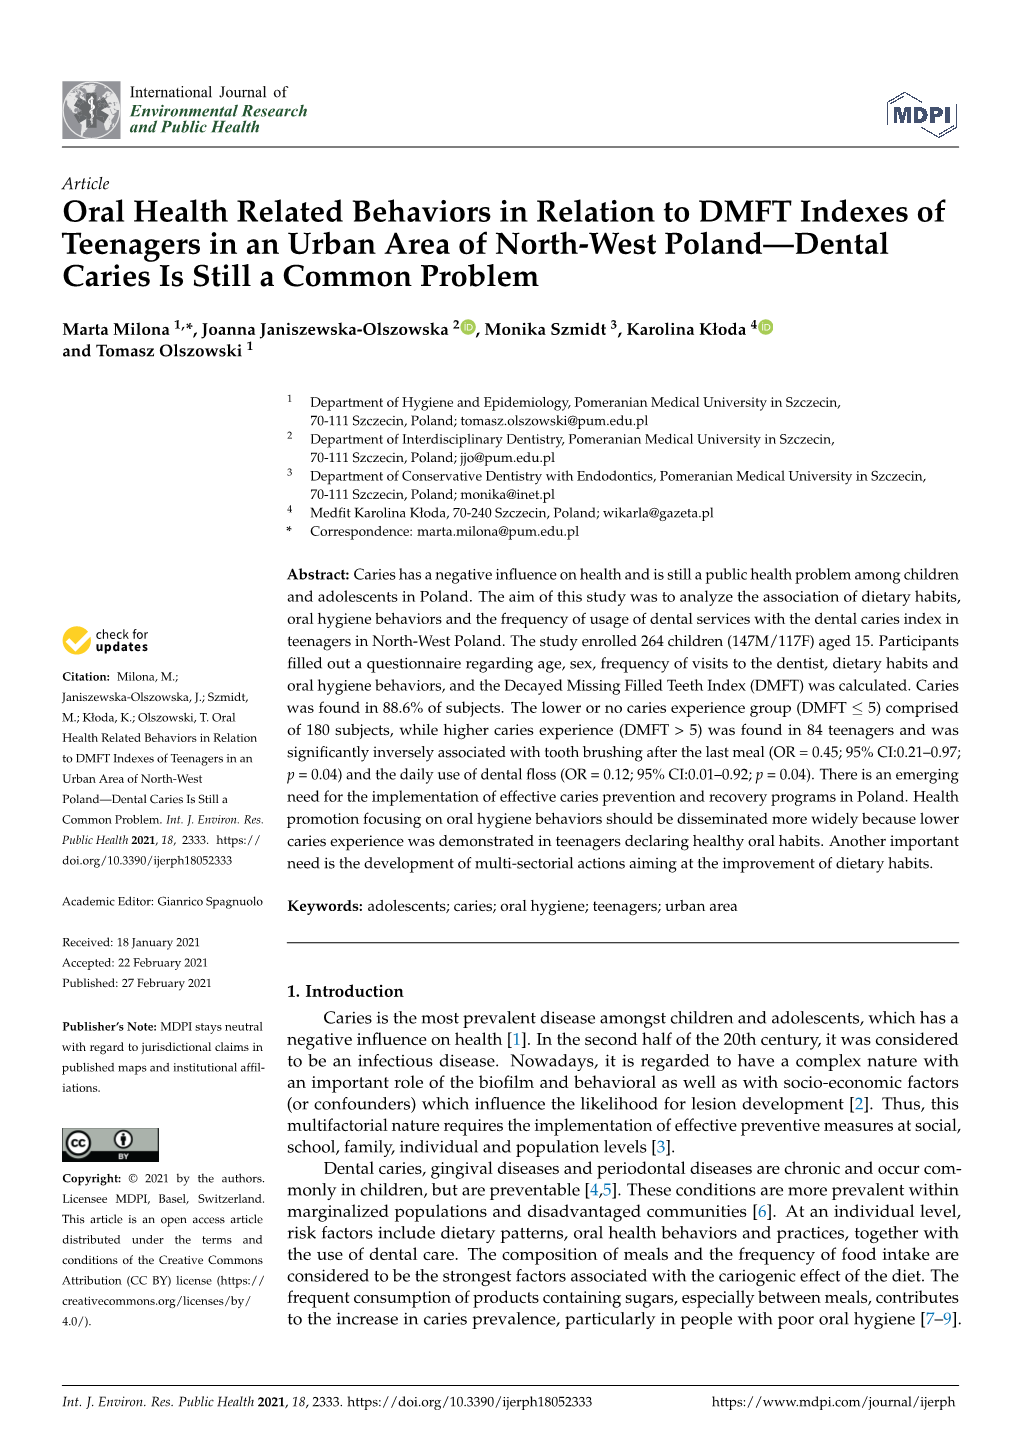 Oral Health Related Behaviors in Relation to DMFT Indexes of Teenagers in an Urban Area of North-West Poland—Dental Caries Is Still a Common Problem